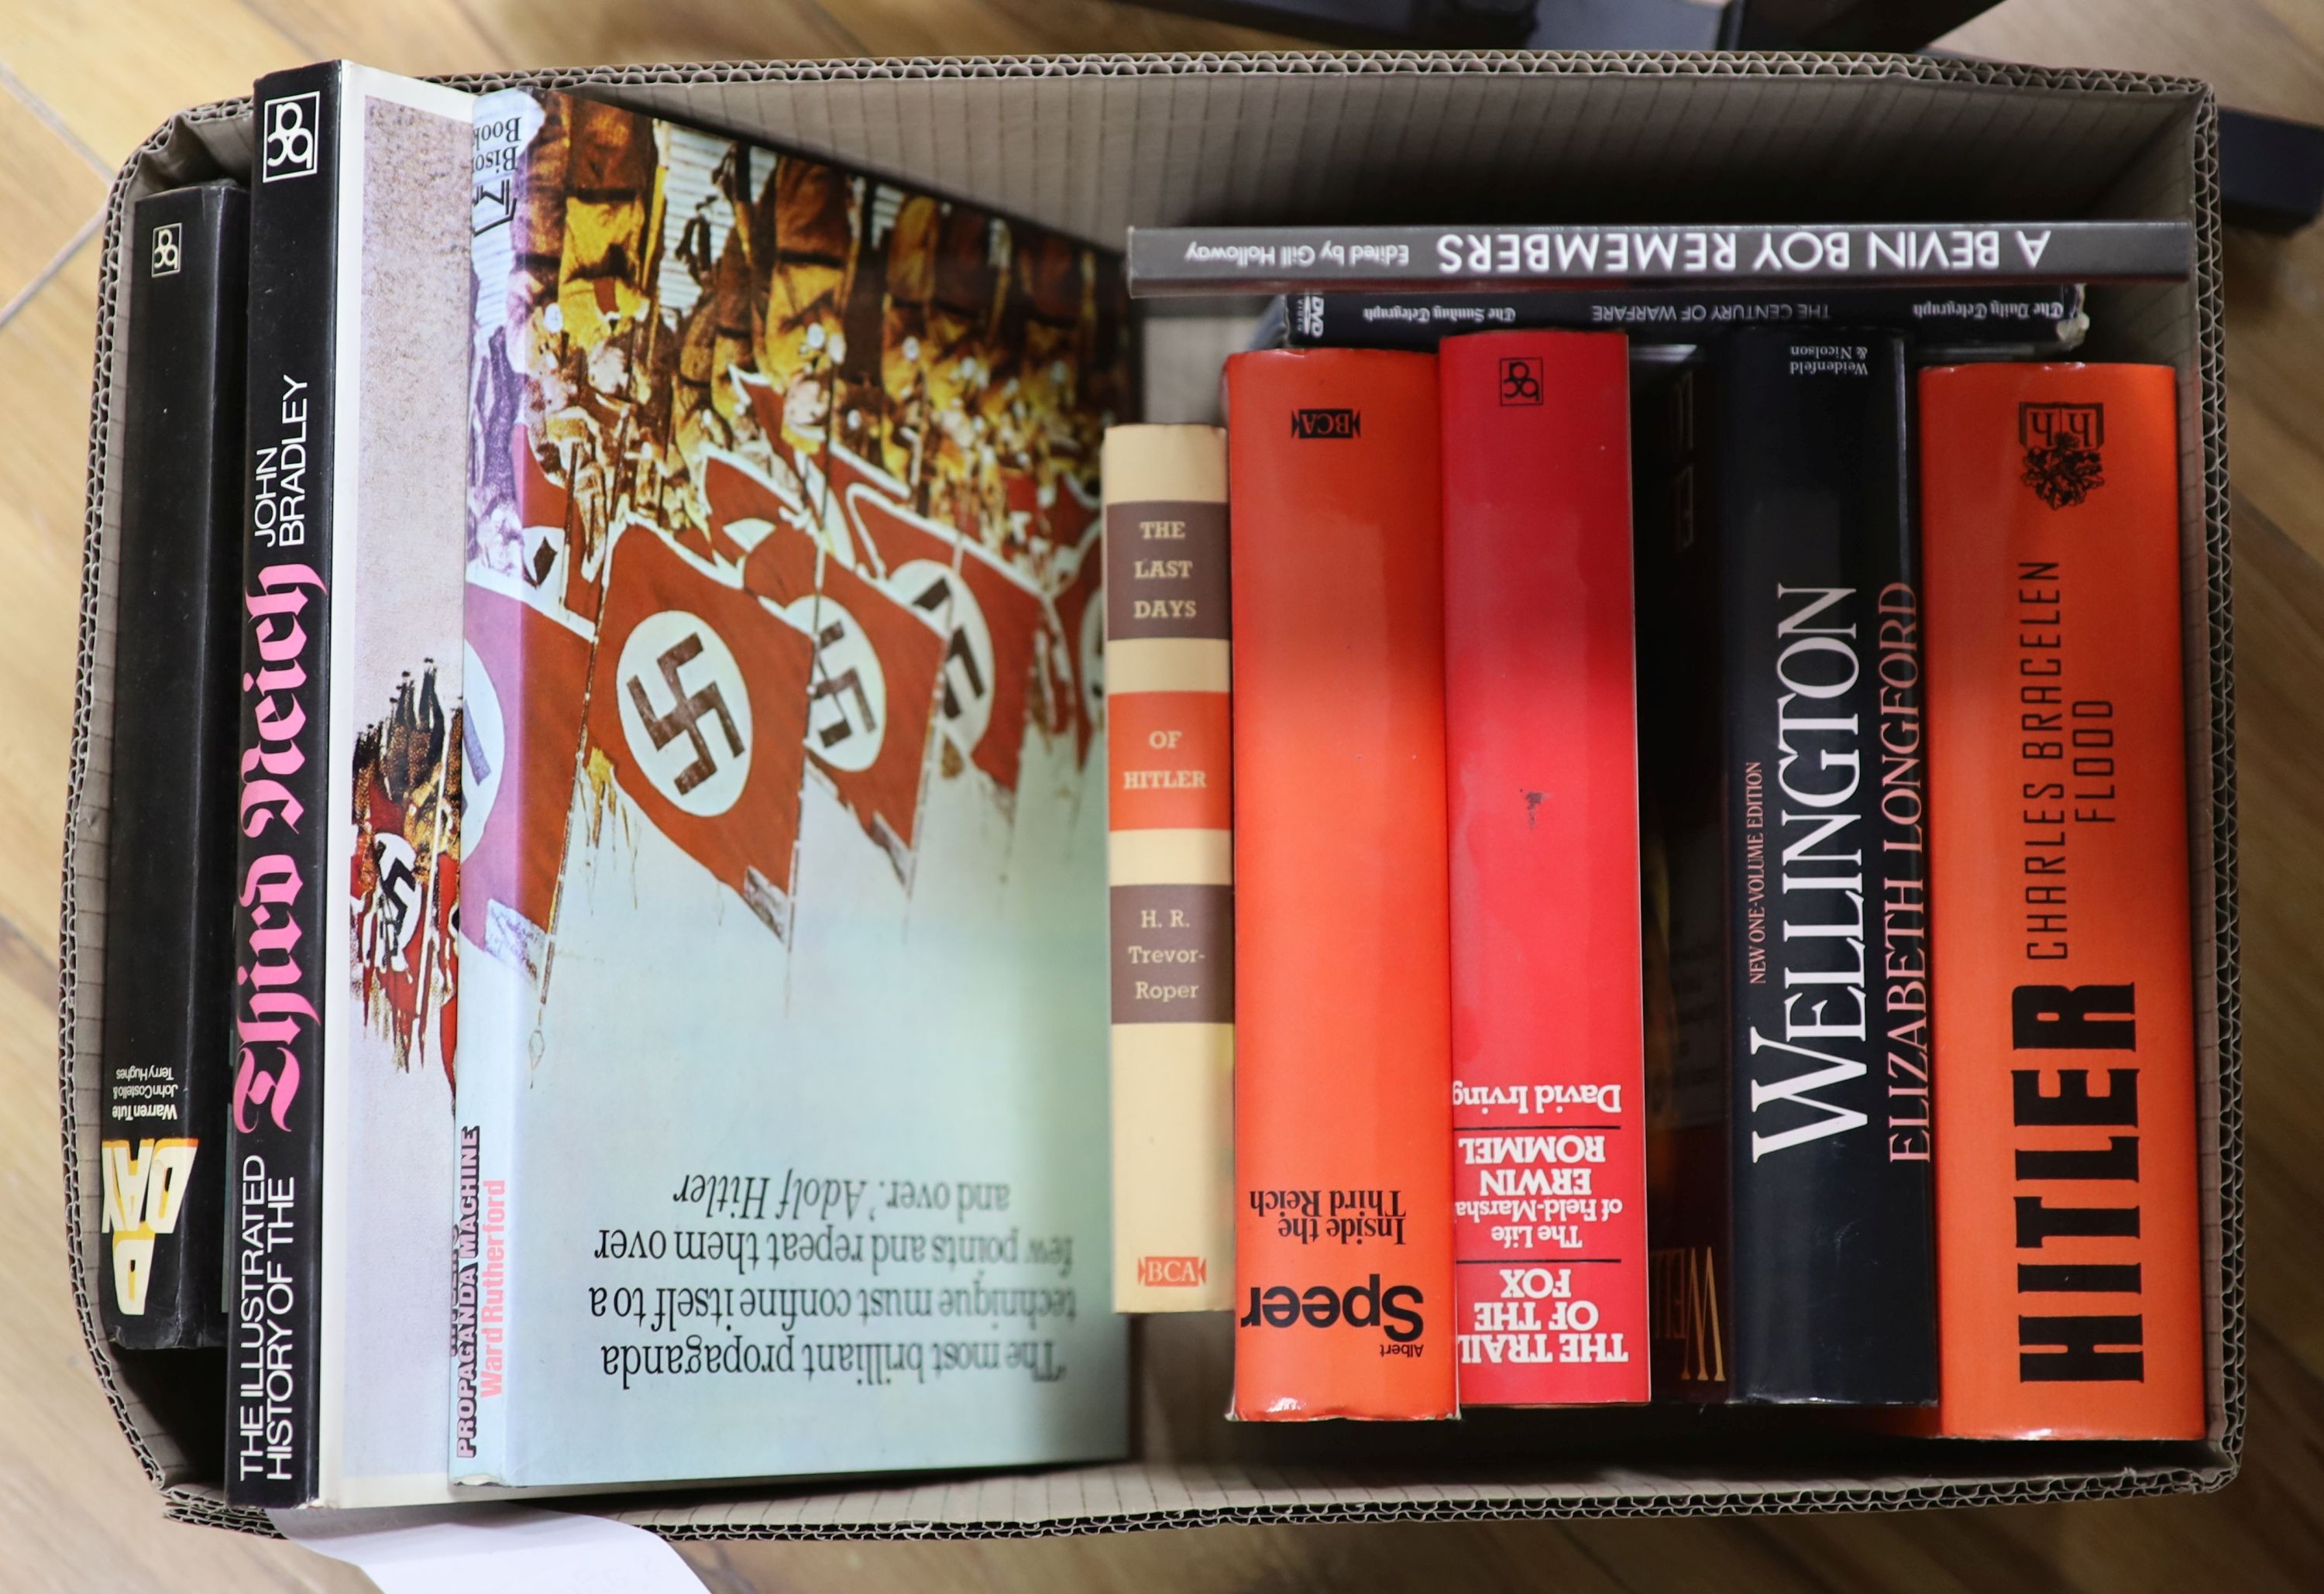 Books on Hitler and one book on Wellington